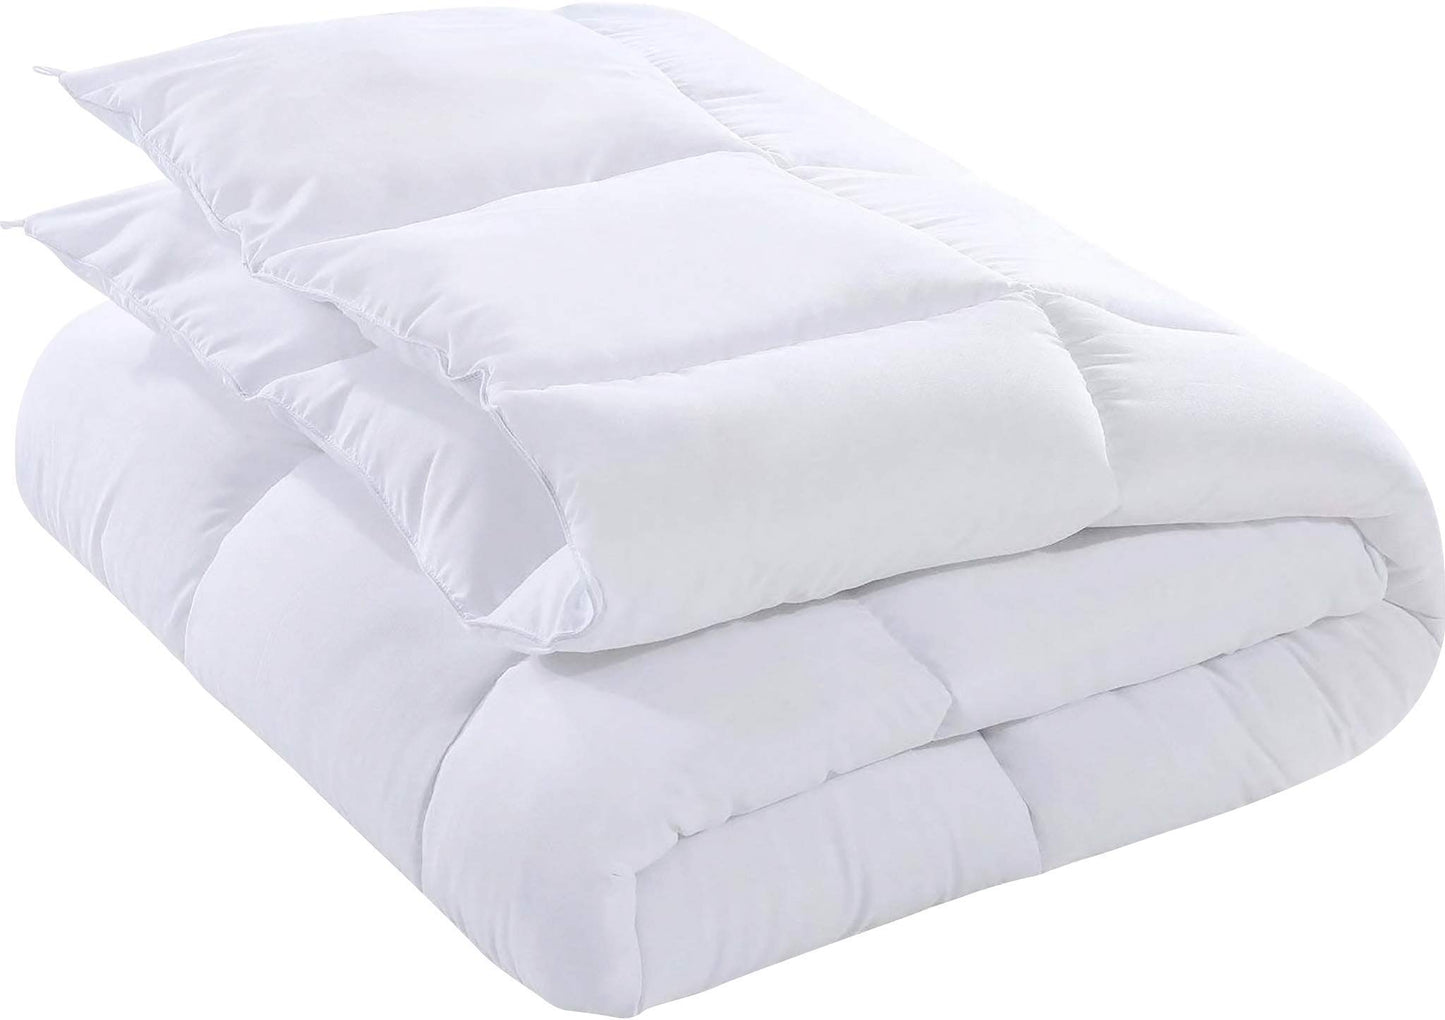 Utopia Bedding Twin XL Comforter Duvet Insert - Quilted Comforter with Corner Tabs - Box Stitched Down Alternative Comforter (Twin XL, White)